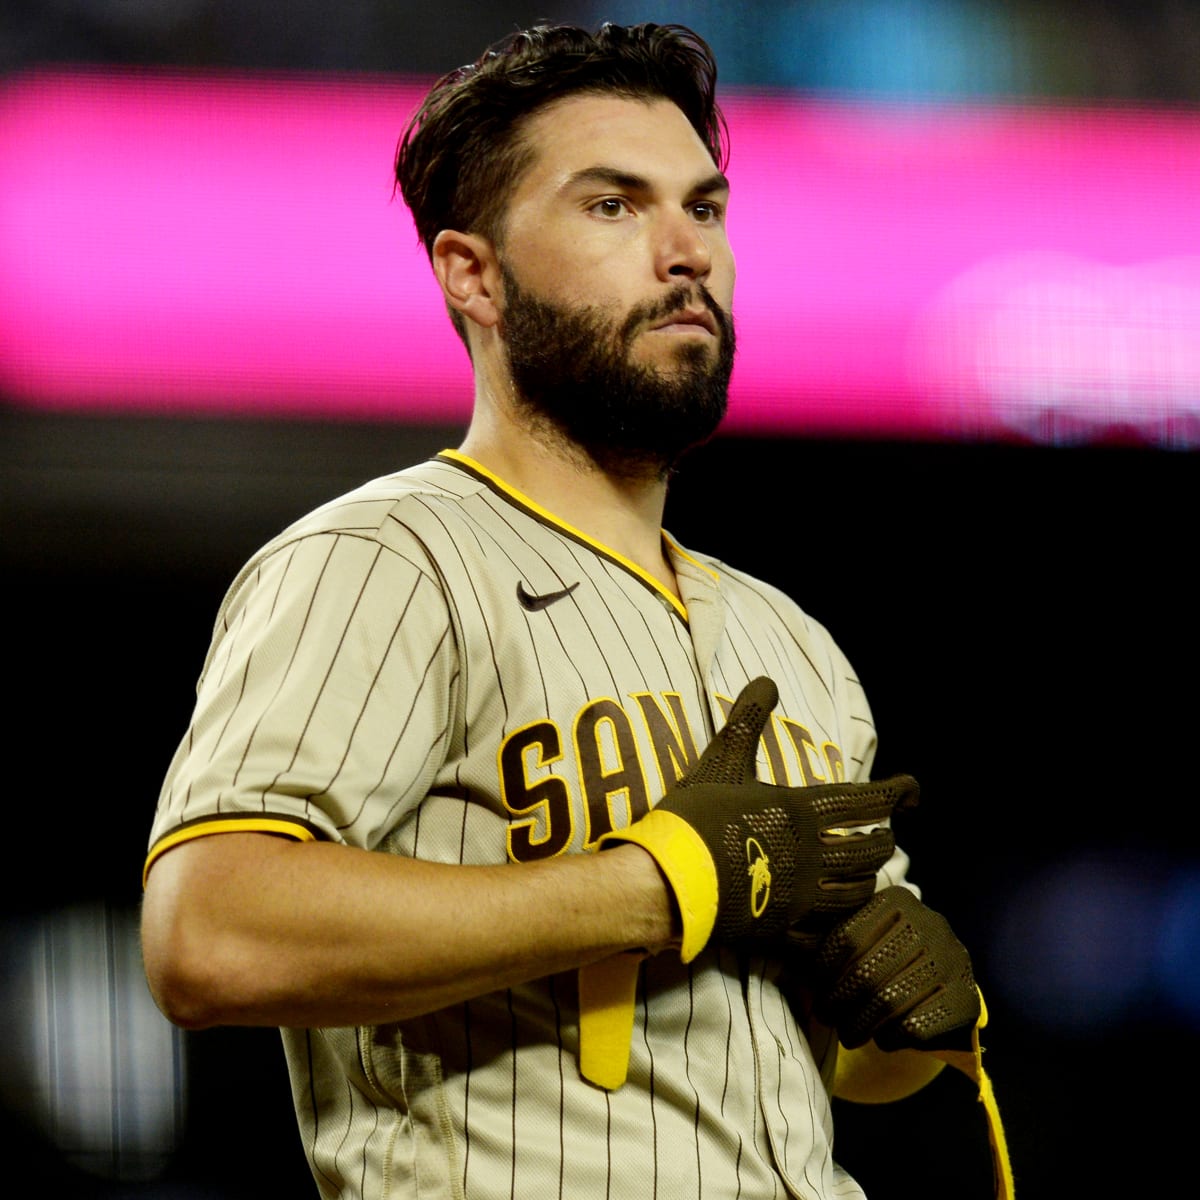 Eric Hosmer designated for assignment by Red Sox